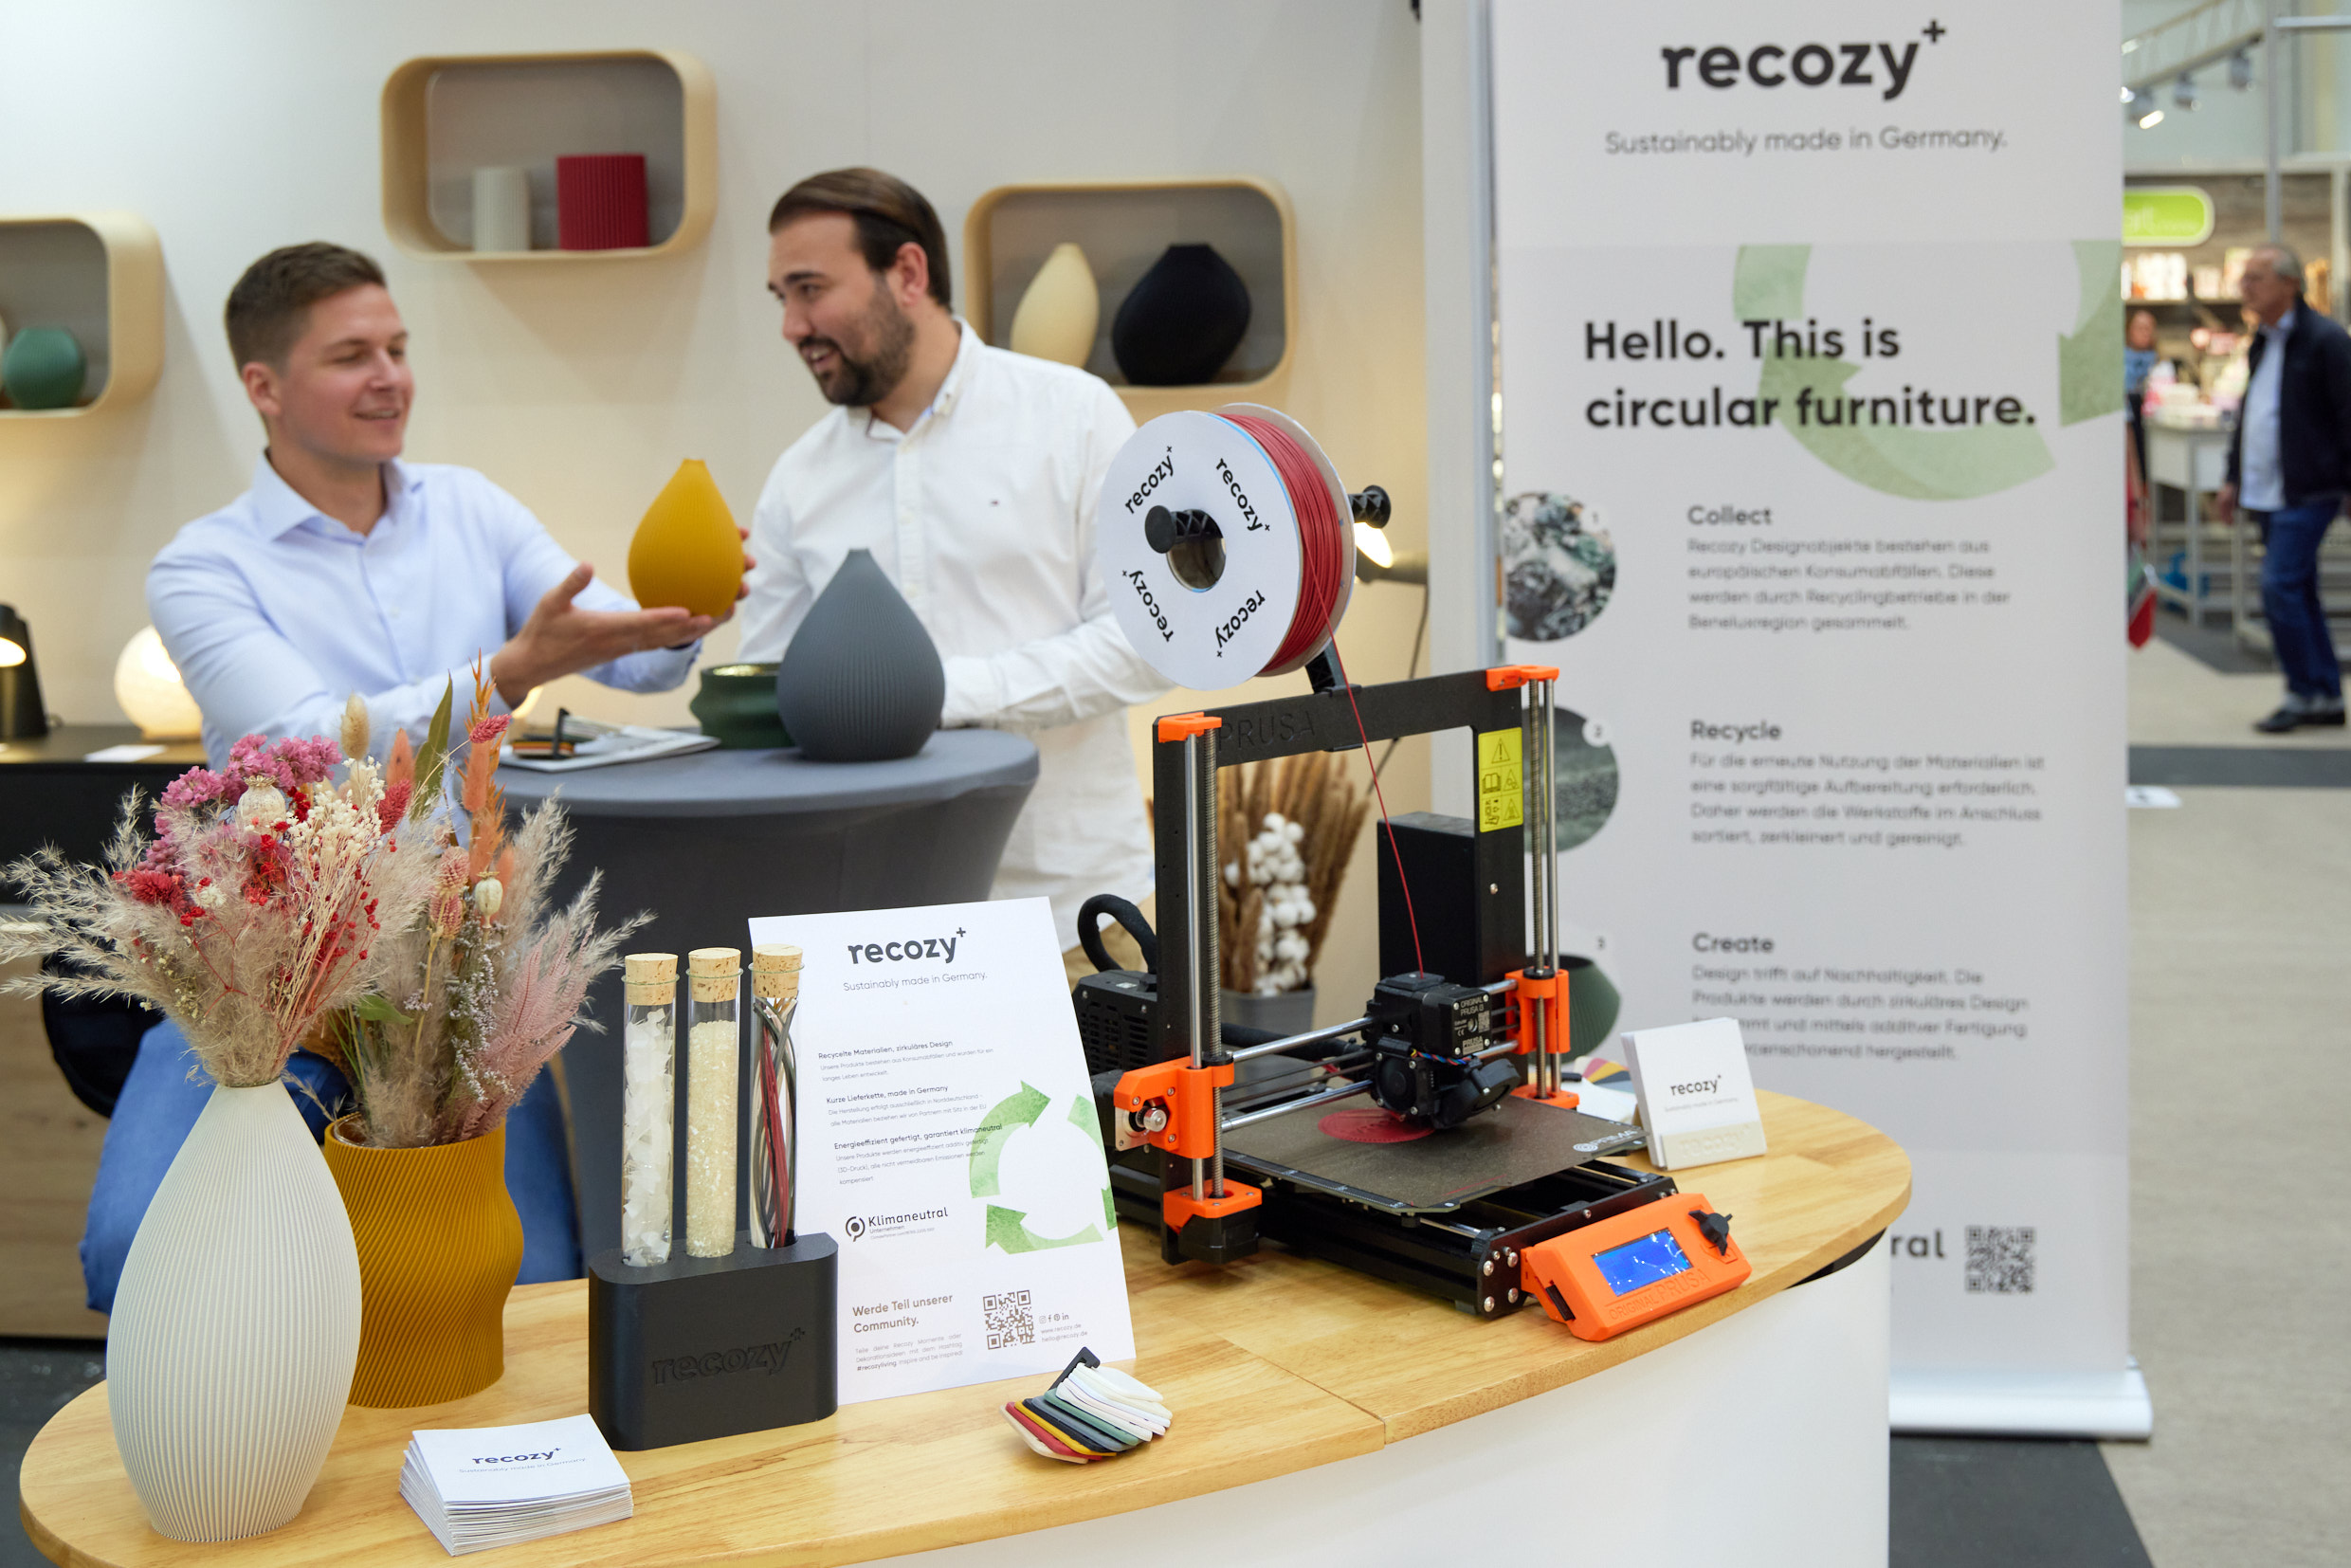 Recozy - Sustainable Manufacturing GmbH